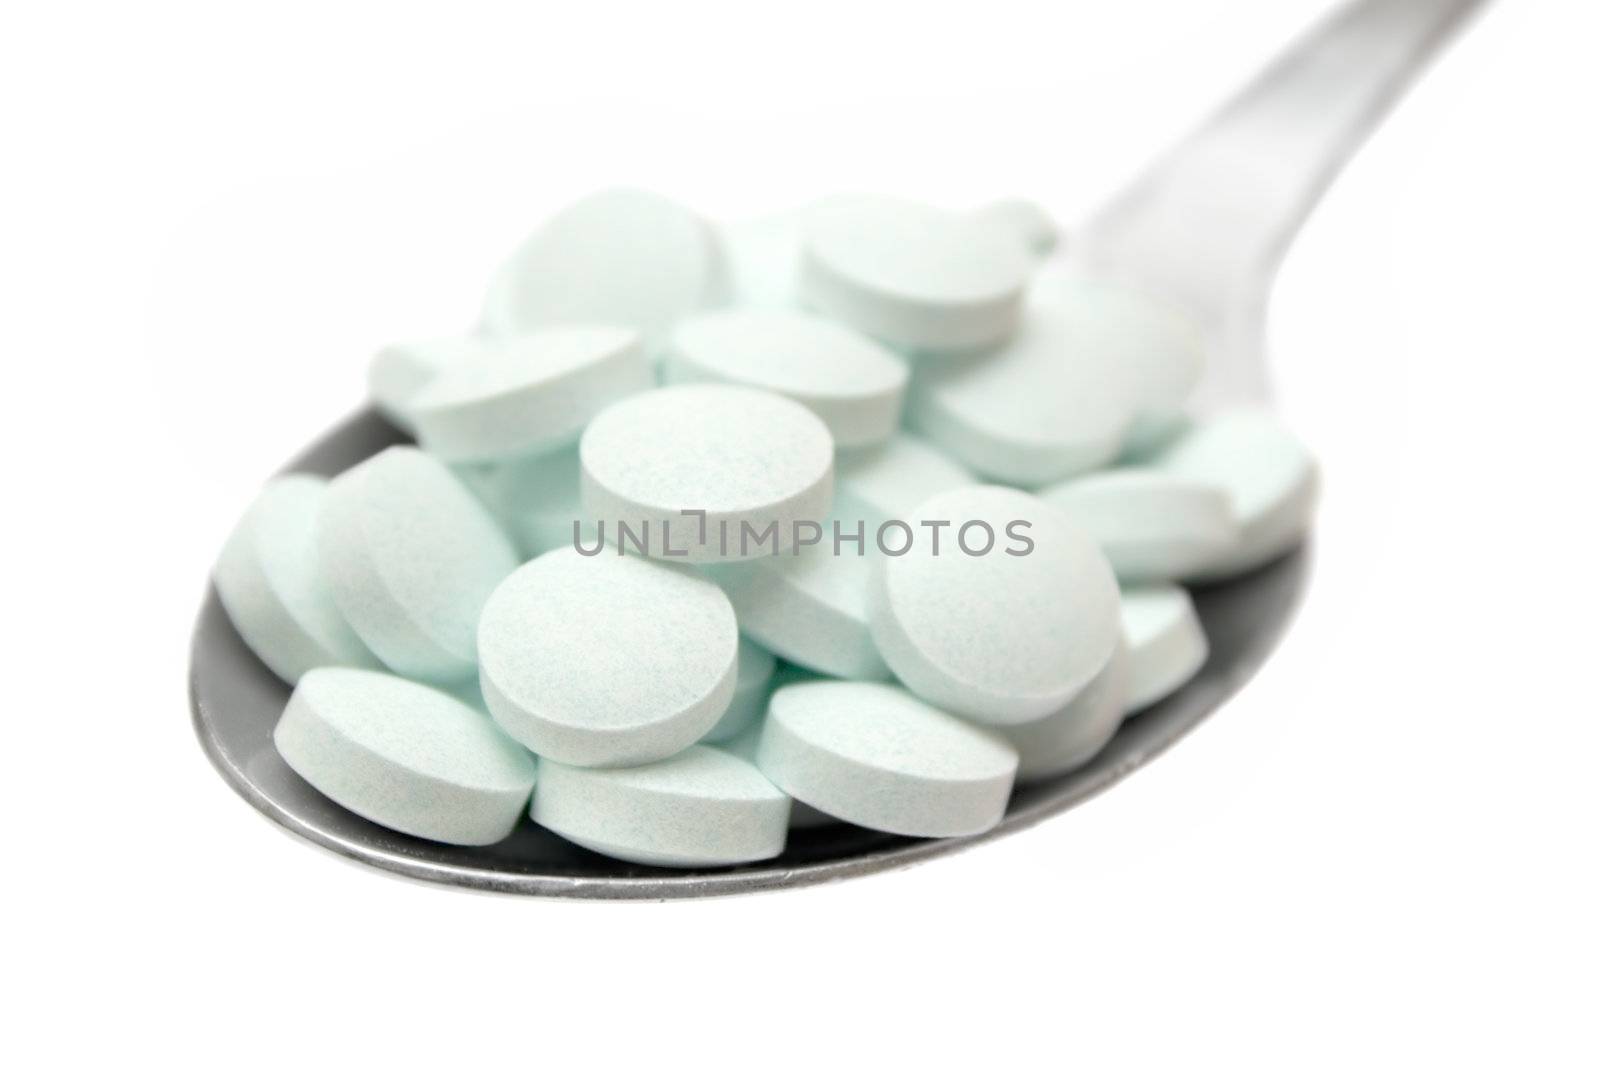 Greenish tablets on a silver spoon. Isolated on a white background.